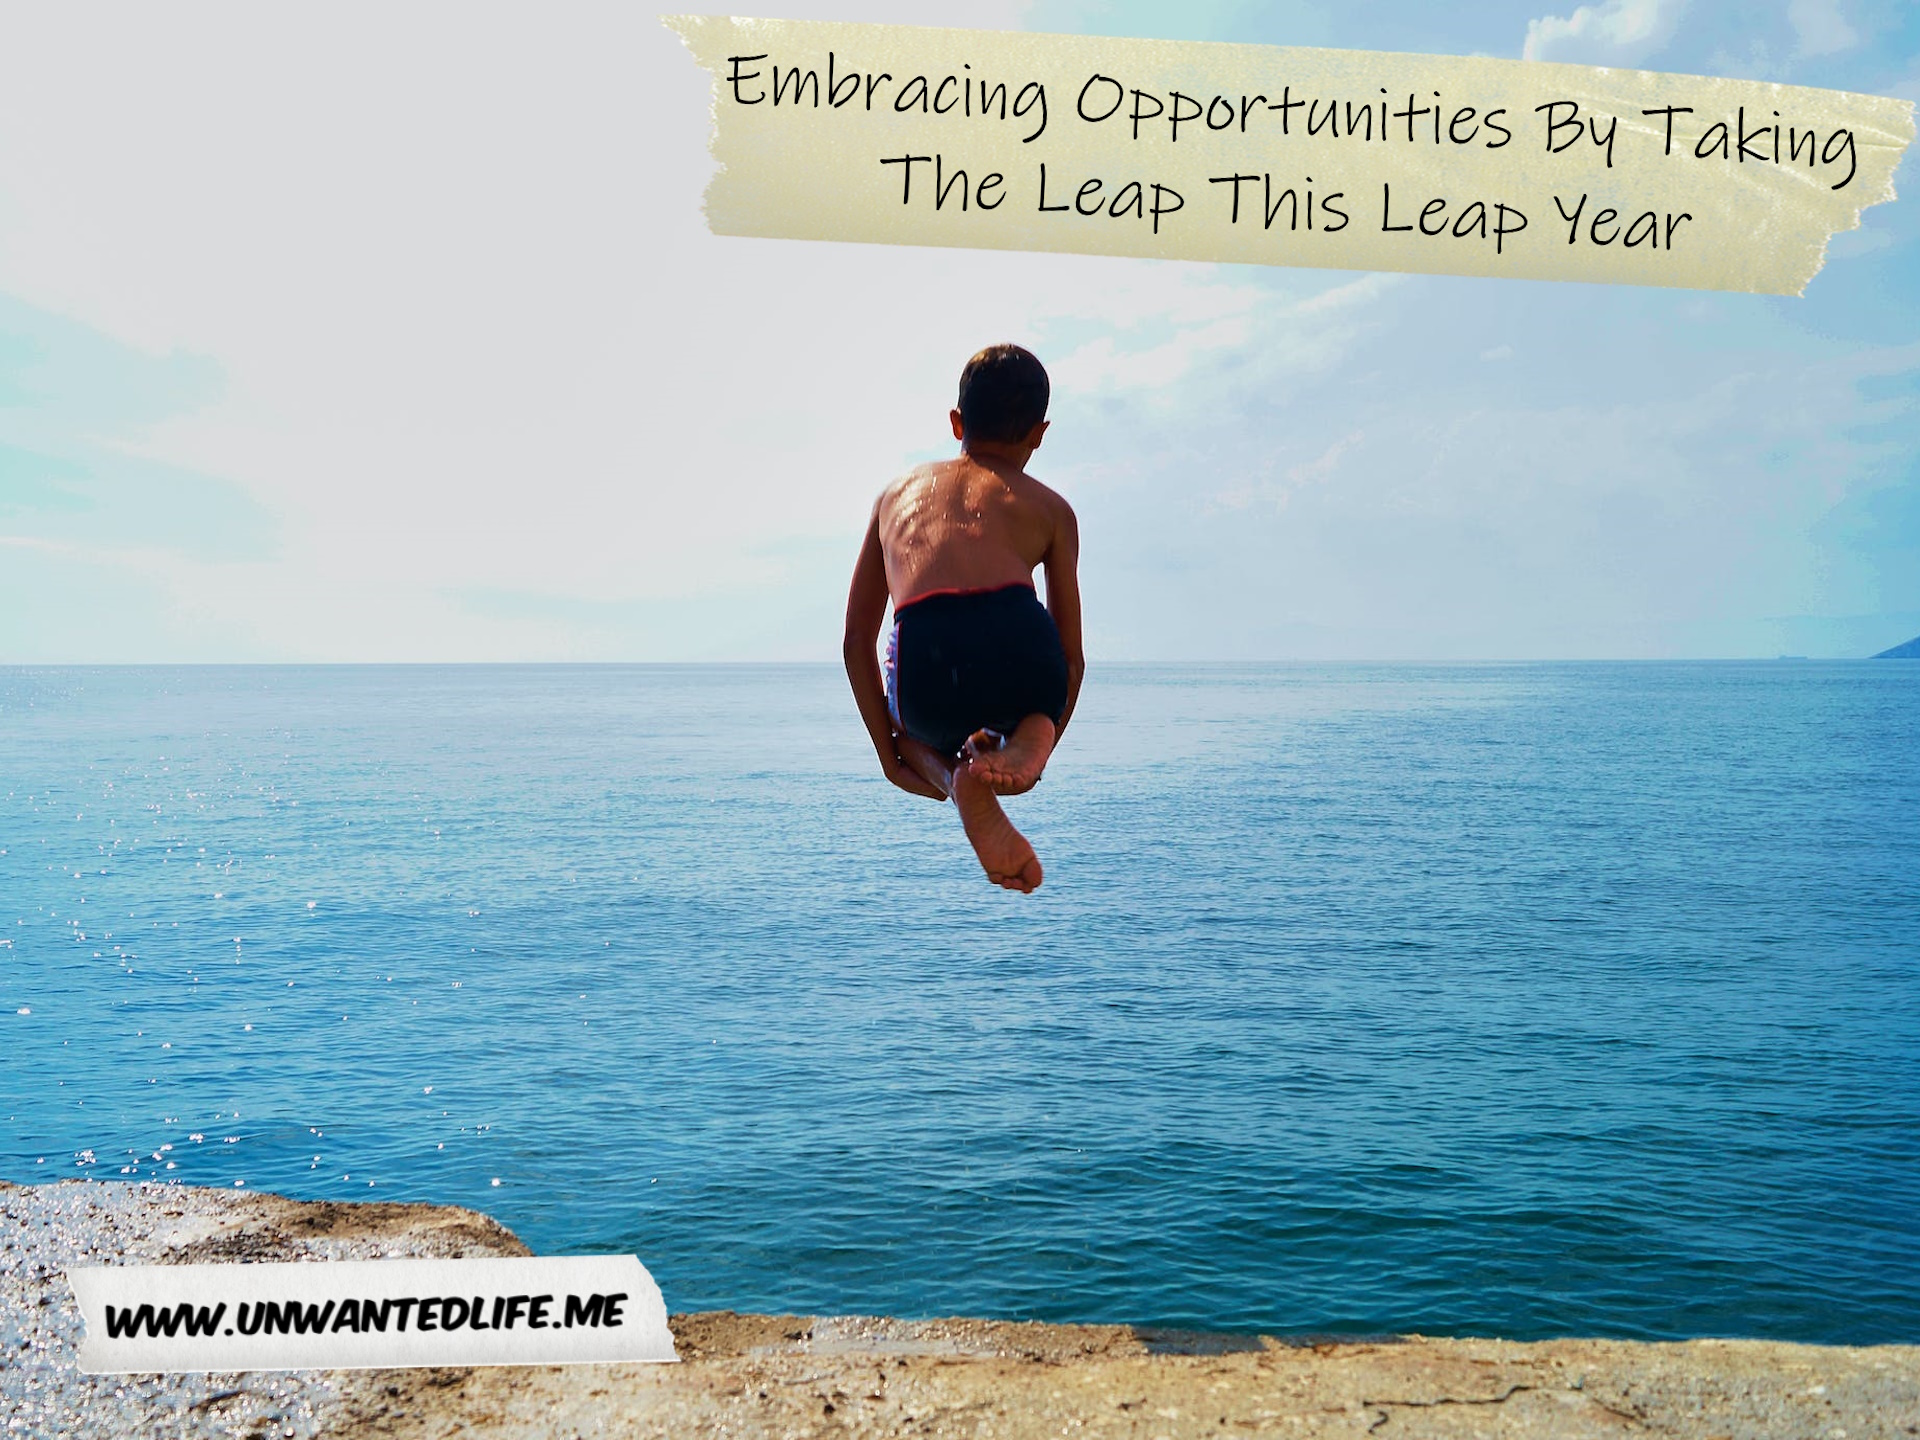 A photo of a young boy of colour jumping off a cliff into the sea to represent the topic of the article - Embracing Opportunities By Taking The Leap This Leap Year